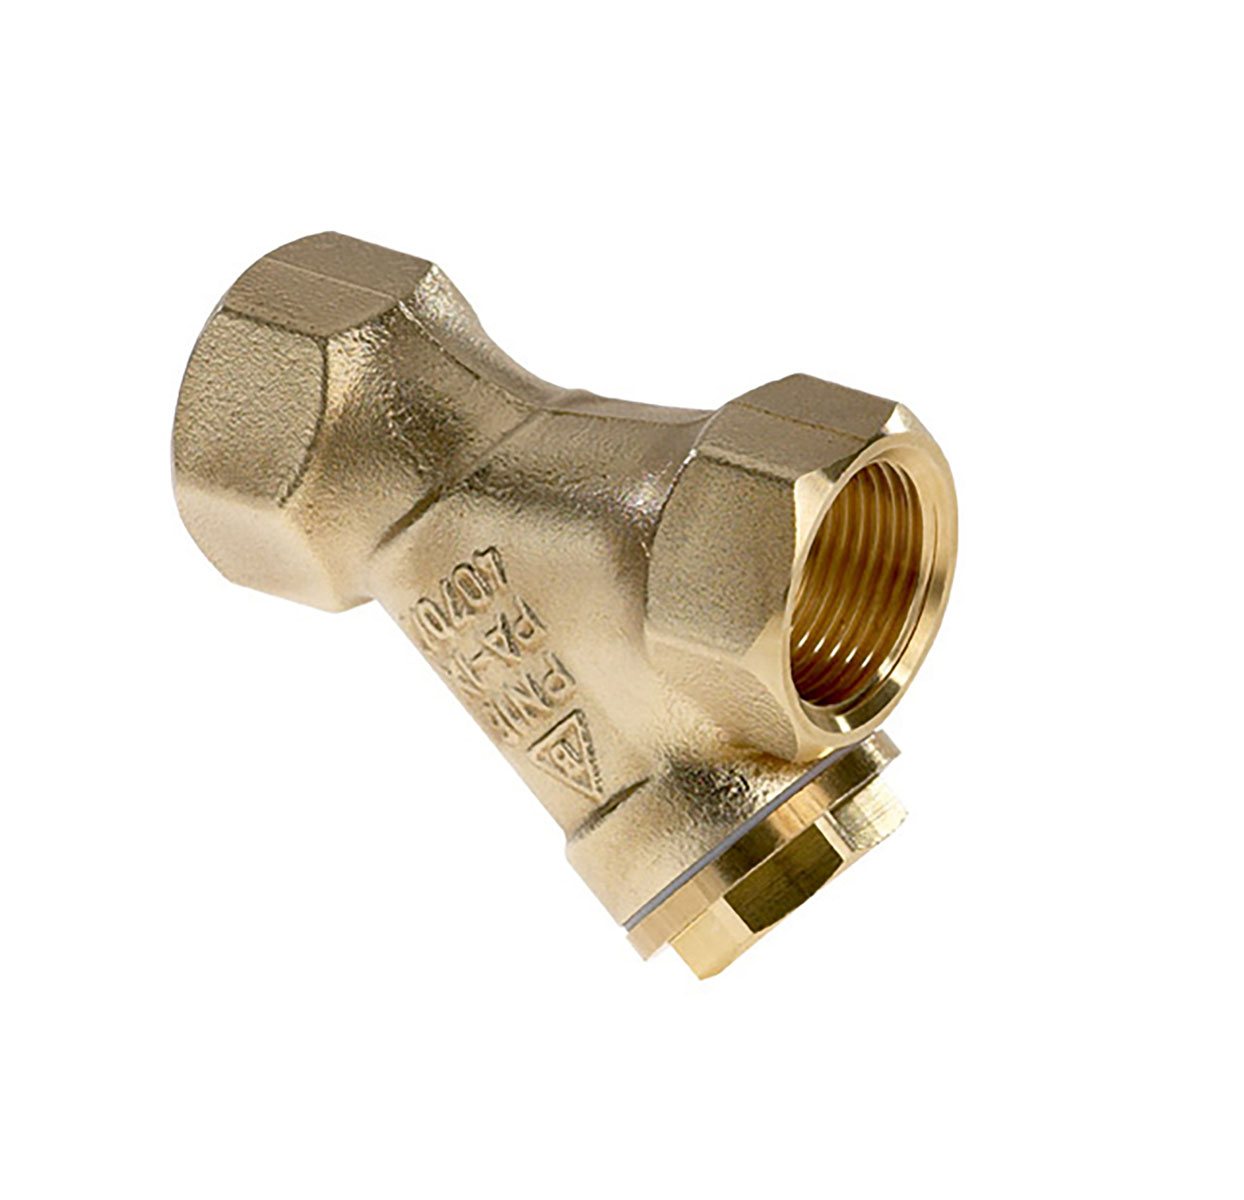 1450200 - CR-Brass Strainer Strainer with PTFE-sealing (Teflon)